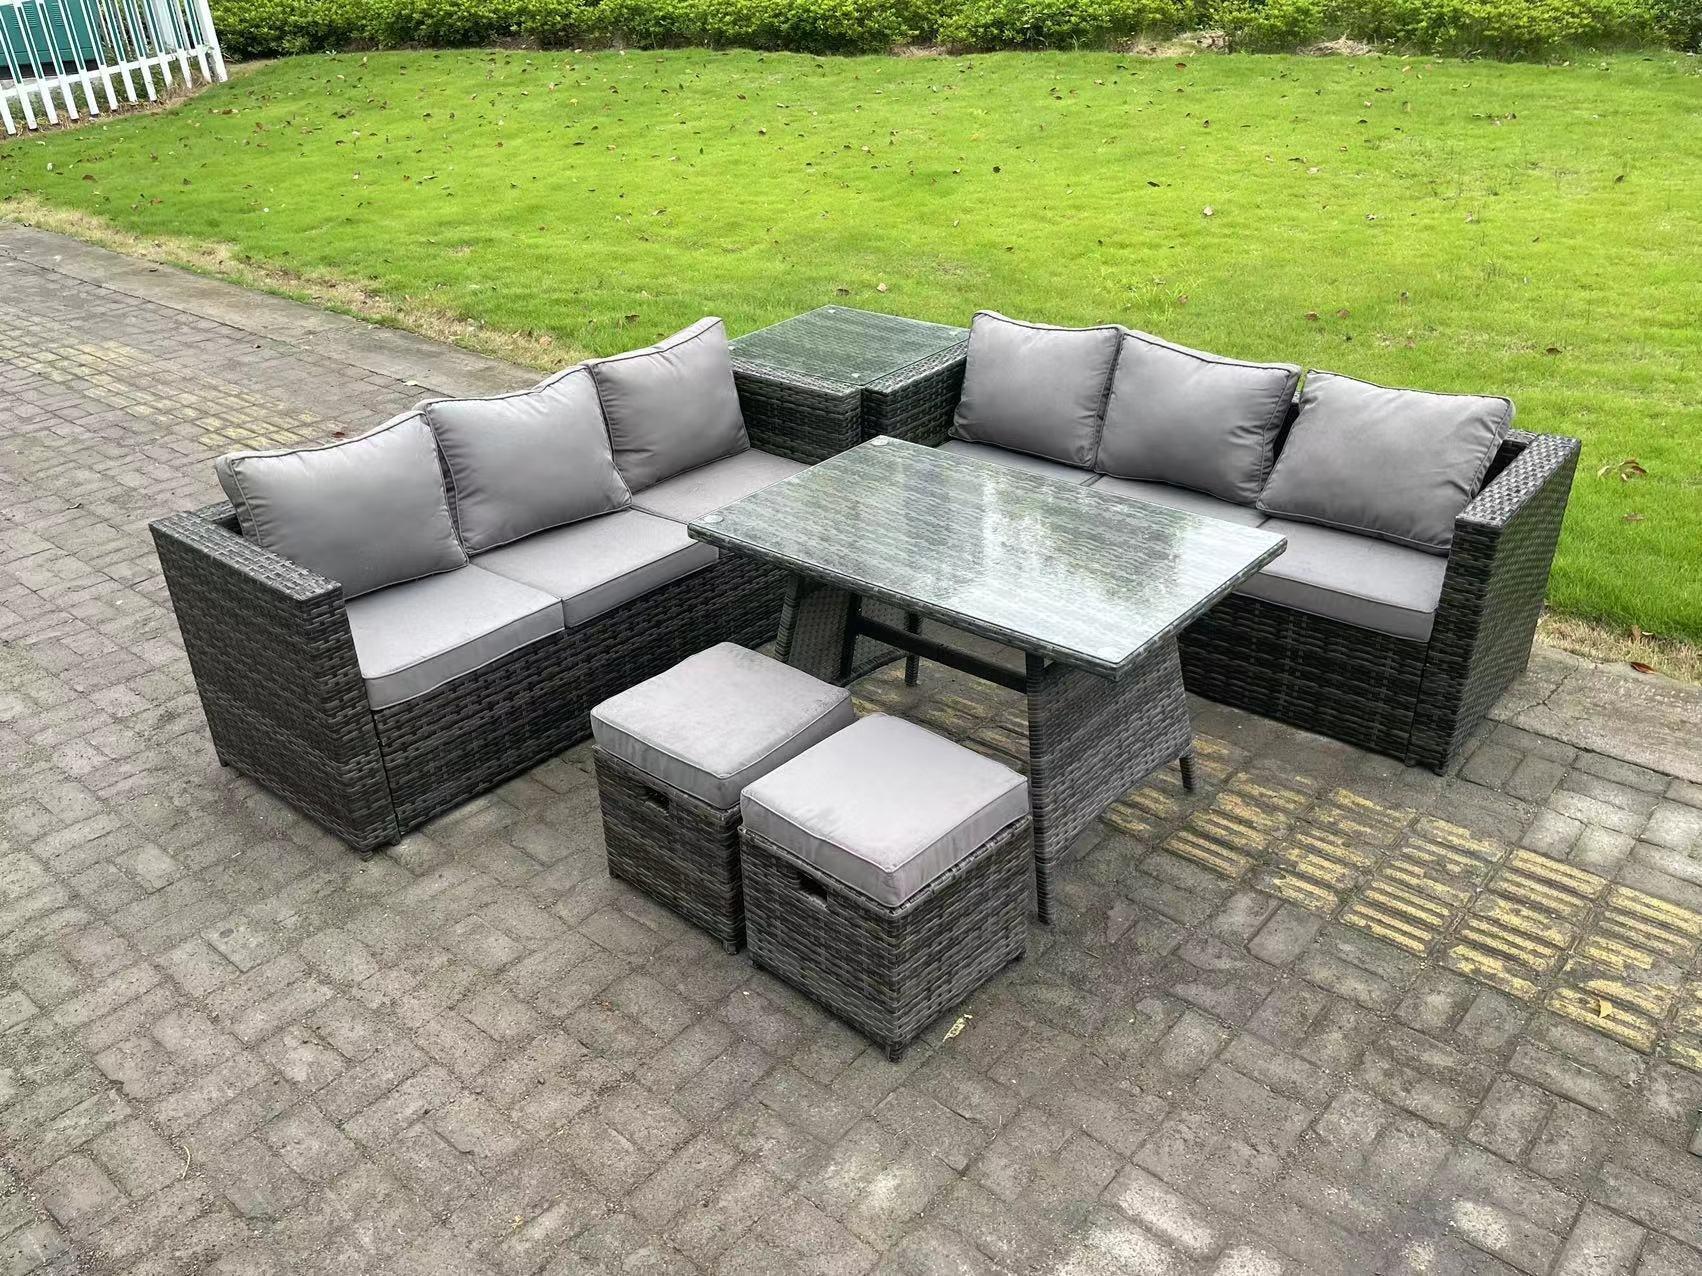 8 Seater Wicker PE Rattan Garden Dining Set Outdoor Furniture Sofa with Side Table Dining Table Stoo